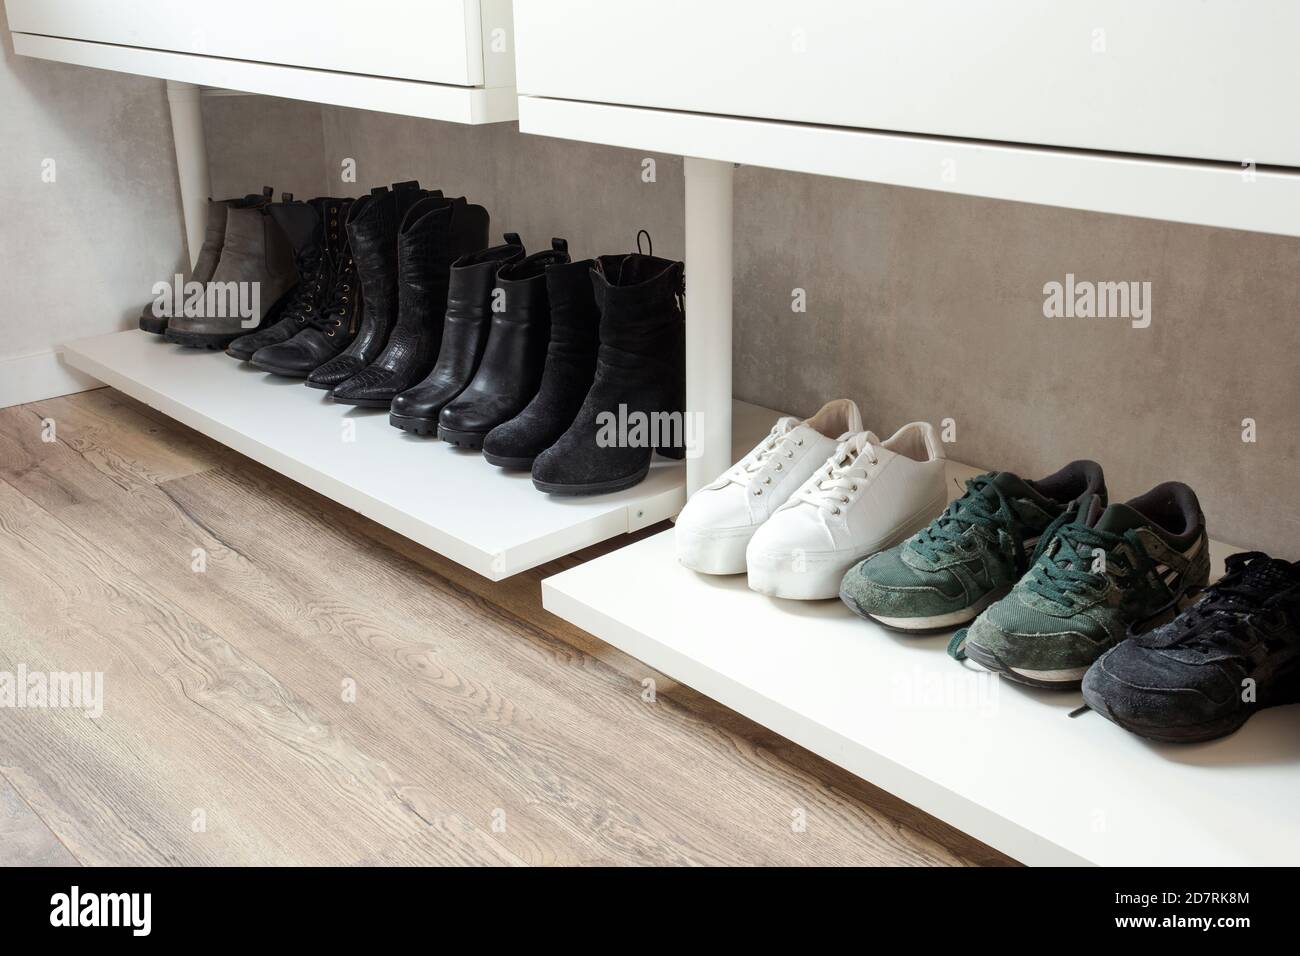 Organized shoe rack, shoe rack with black stylisch shoes and boots, on a wooden floor, besides a white wall. modern room Stock Photo